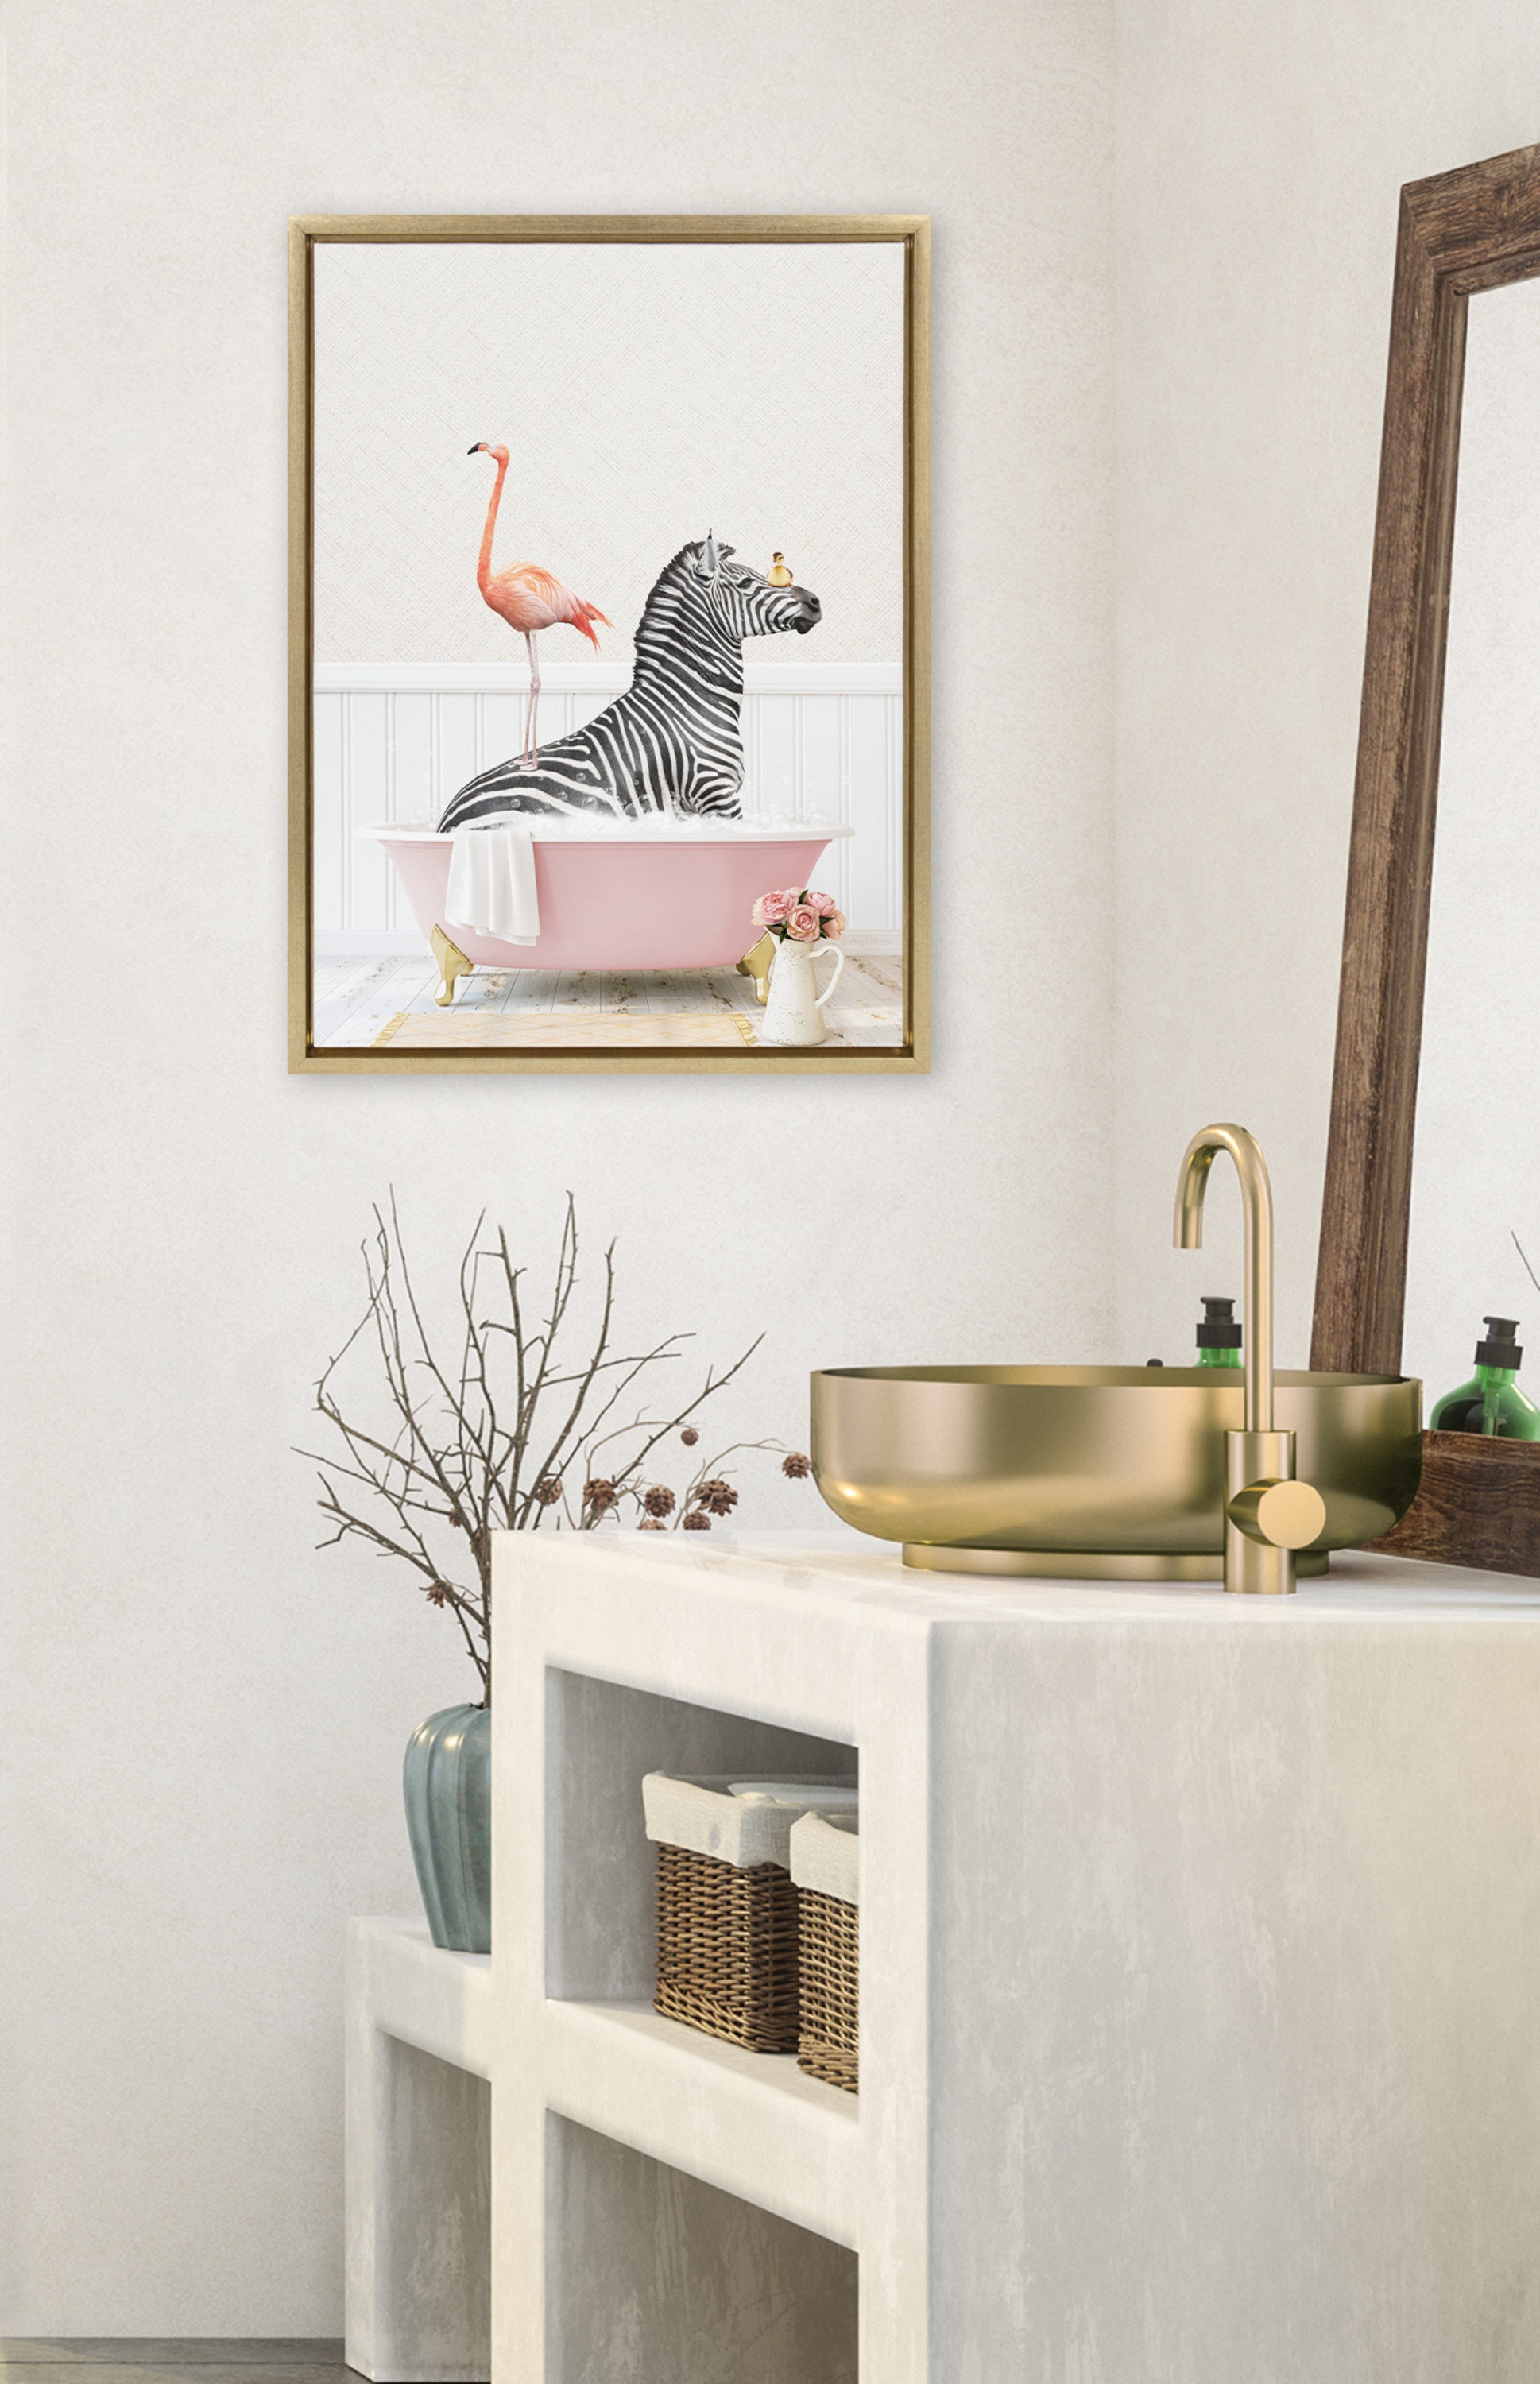 Sylvie Zebra and Flamingo in Cottage Rose Bath Framed Canvas by Amy Peterson Art Studio